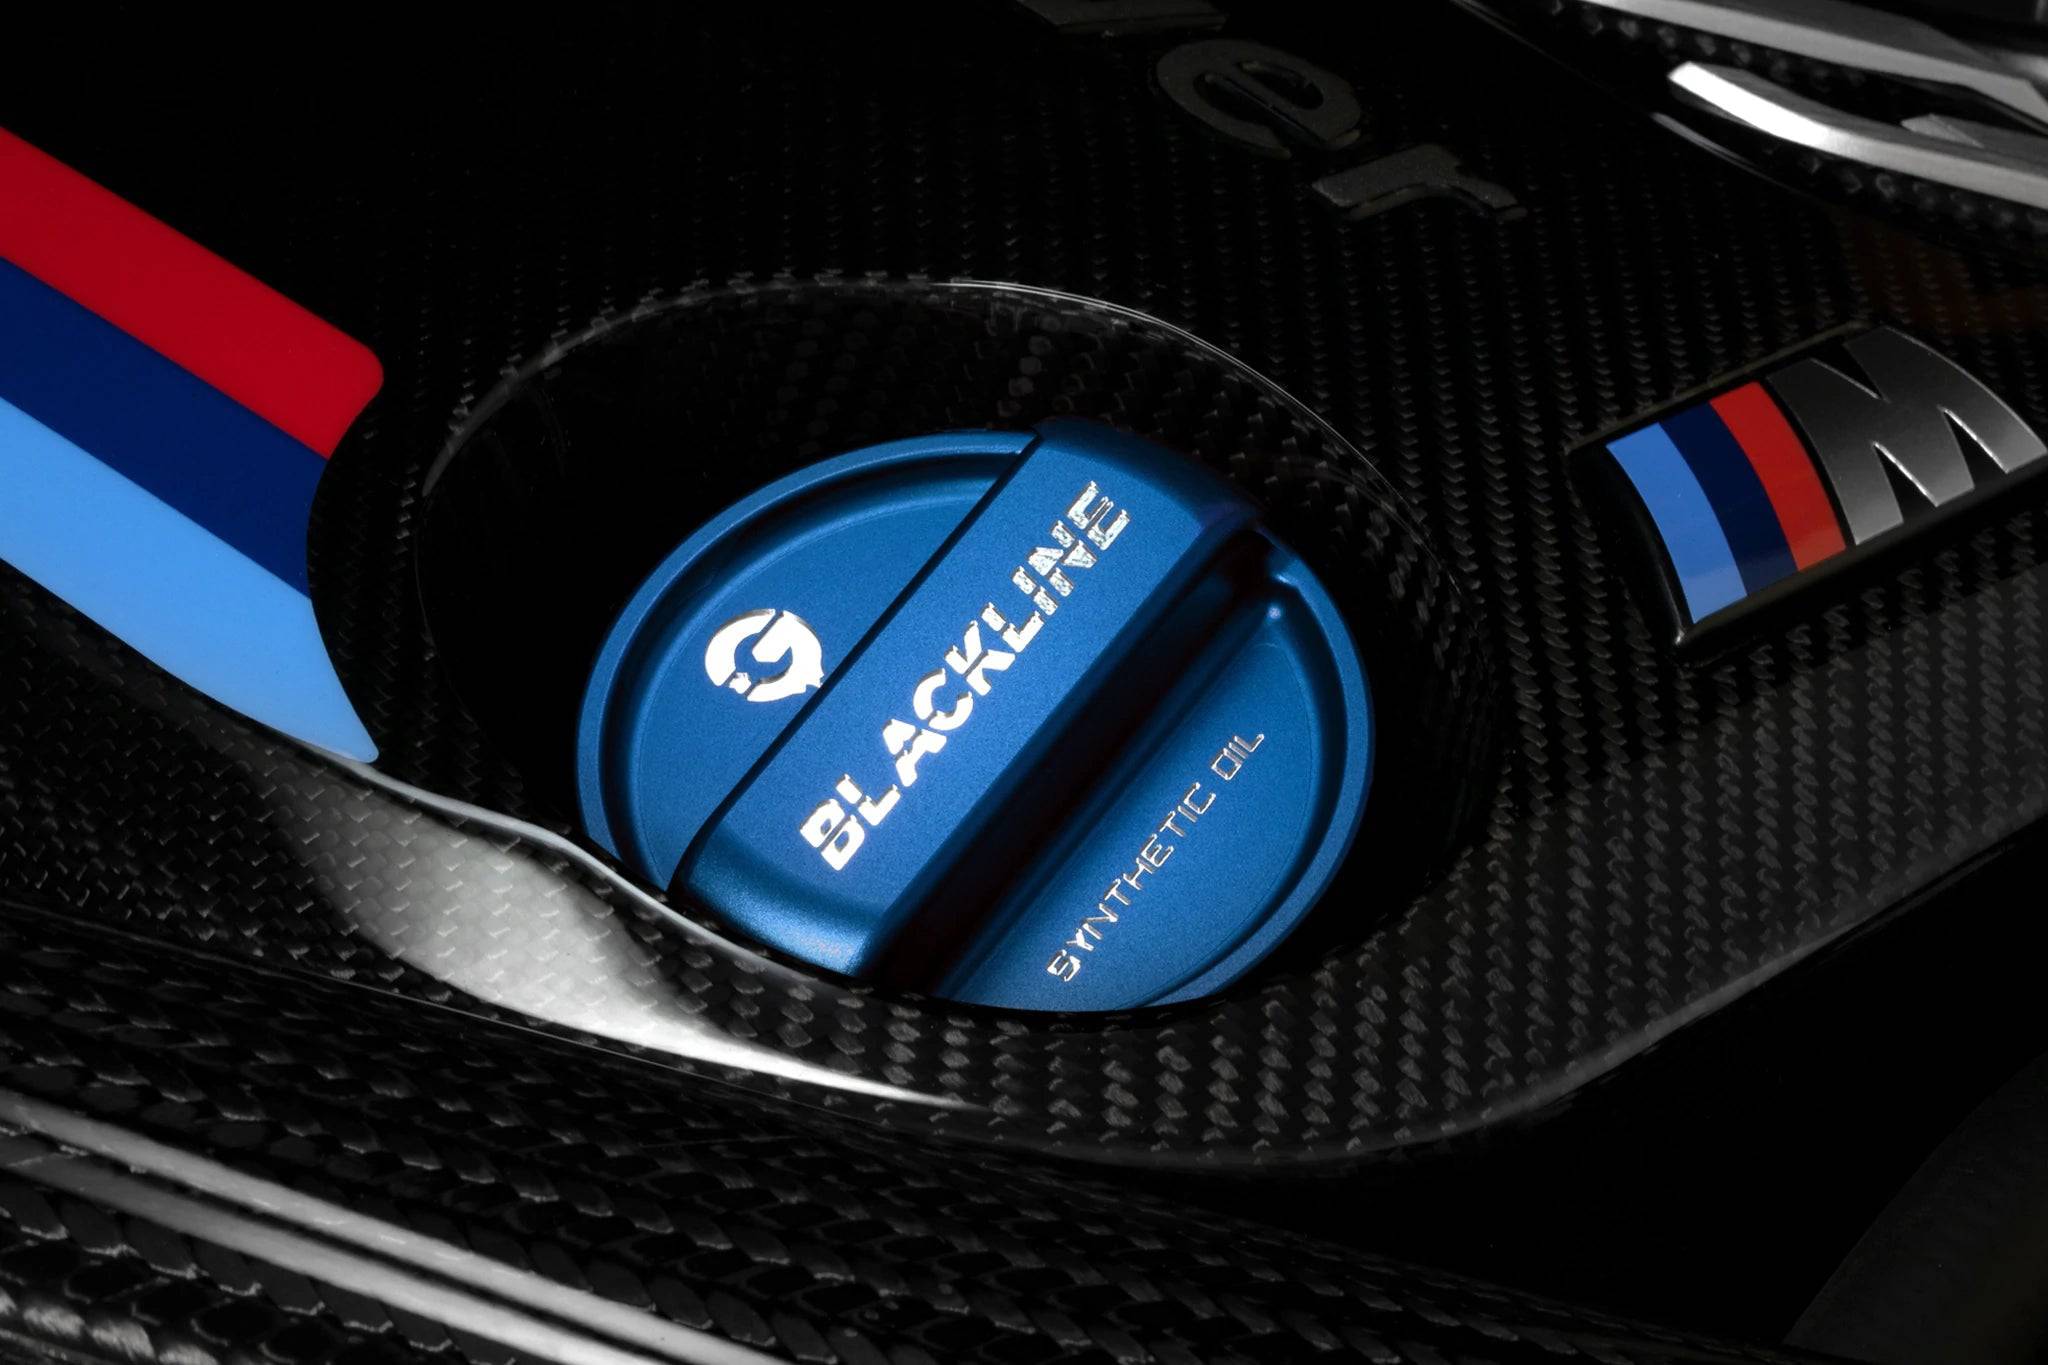 BLACKLINE Oil Cap Cover for BMW M Vehicles (N55, S55, S63), Vehicle Dress Up Caps & Covers, Goldenwrench Supply - AUTOID | Premium Automotive Accessories